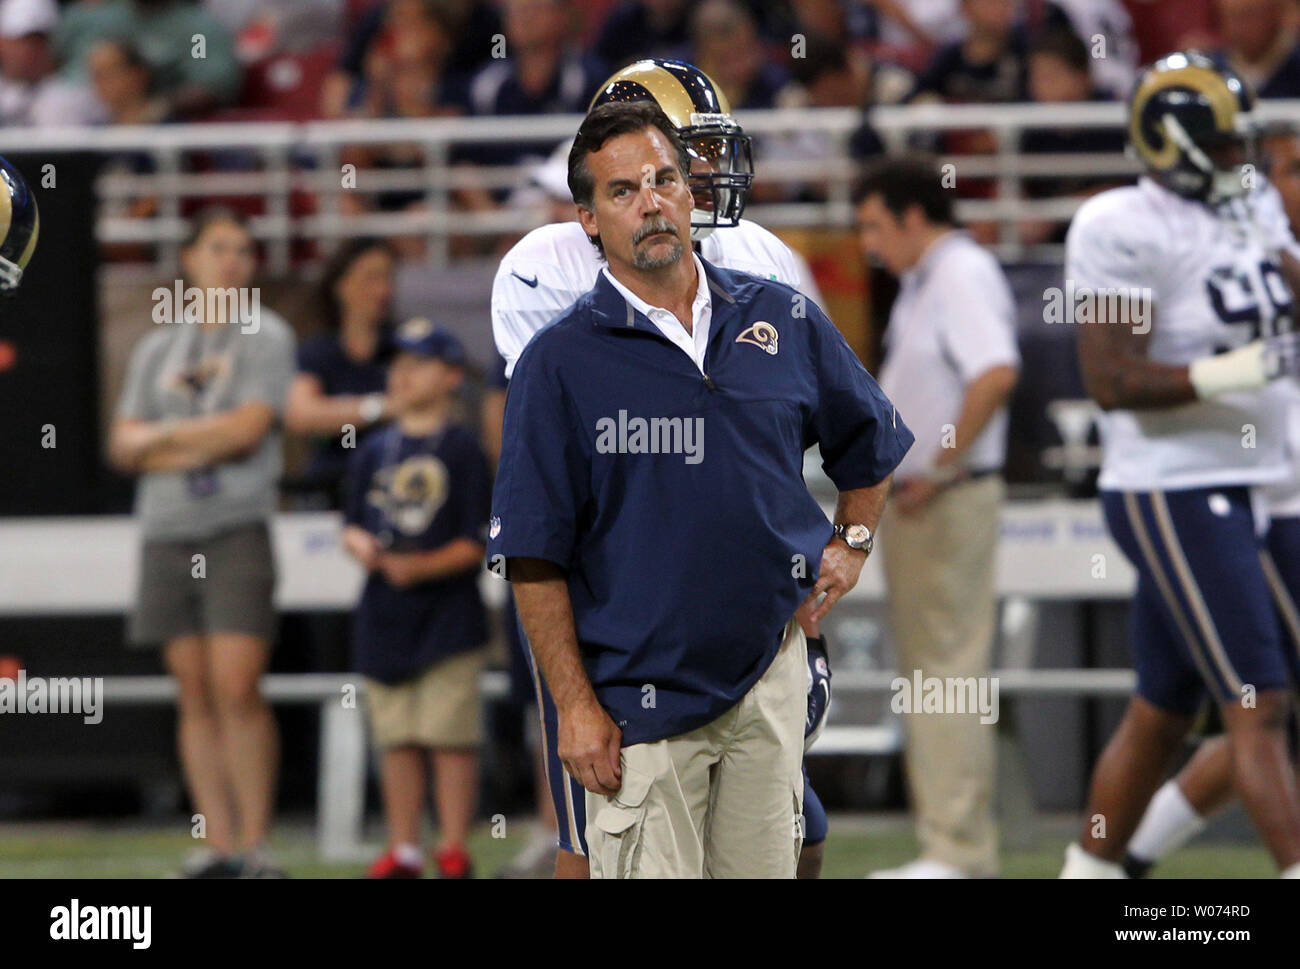 St. Louis Rams head coach Jeff Fisher watches his players practice during the Fan Fest scrimage at the Edward Jones Dome in St. Louis on August 4, 2012.    UPI/Bill Greenblatt Stock Photo